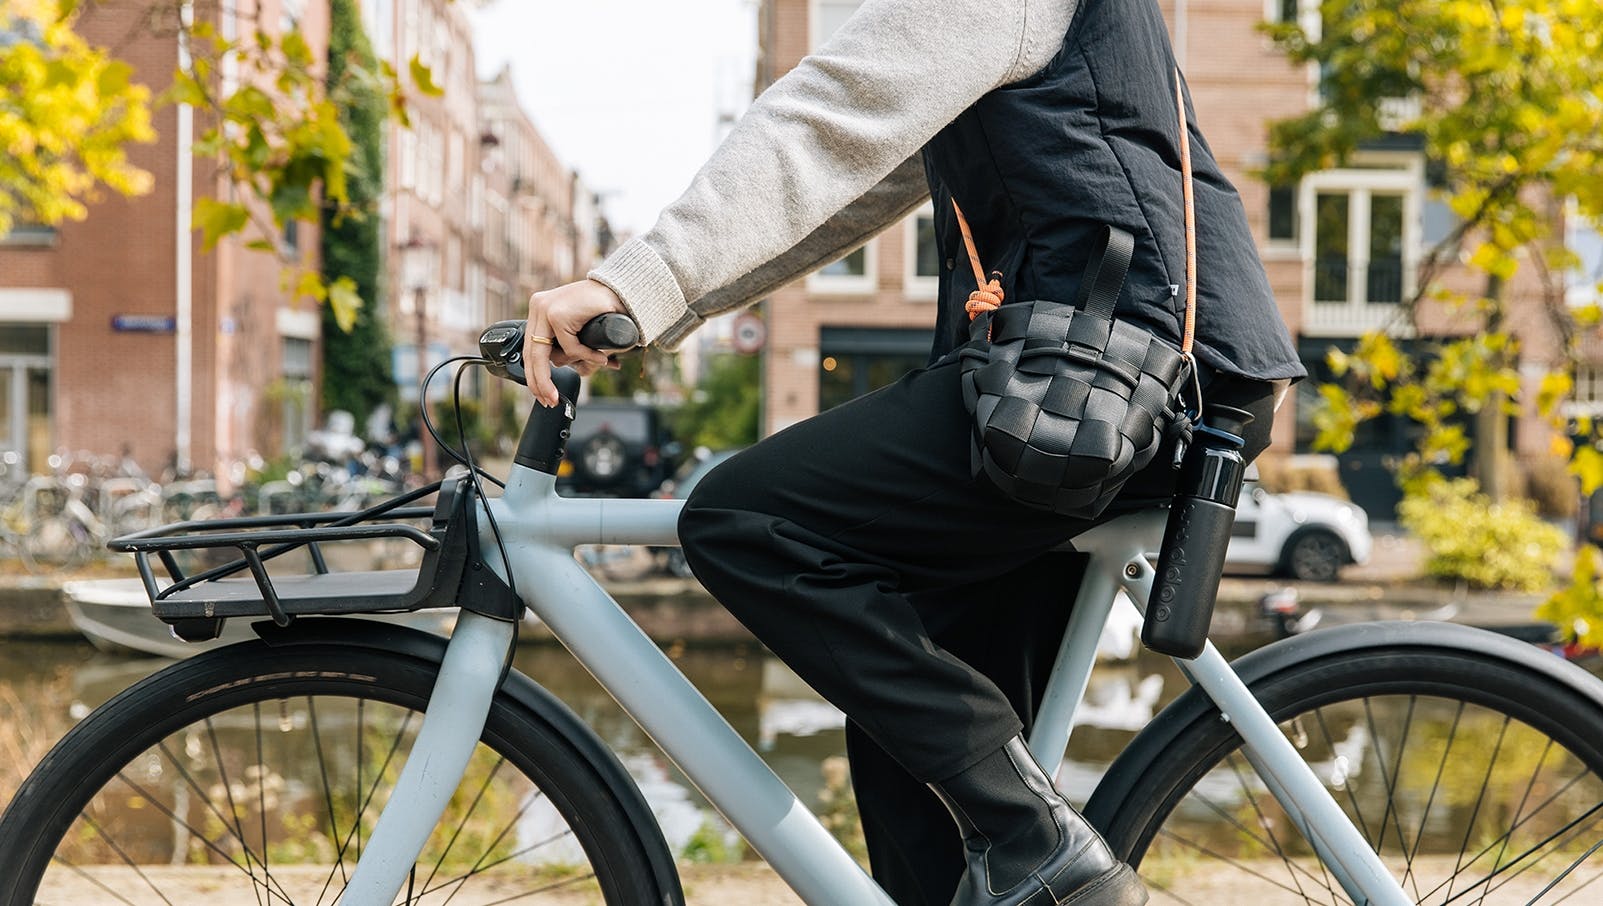 Close up from a person riding a bike and carrying a black Dopper Insulated bottle attached to her bag